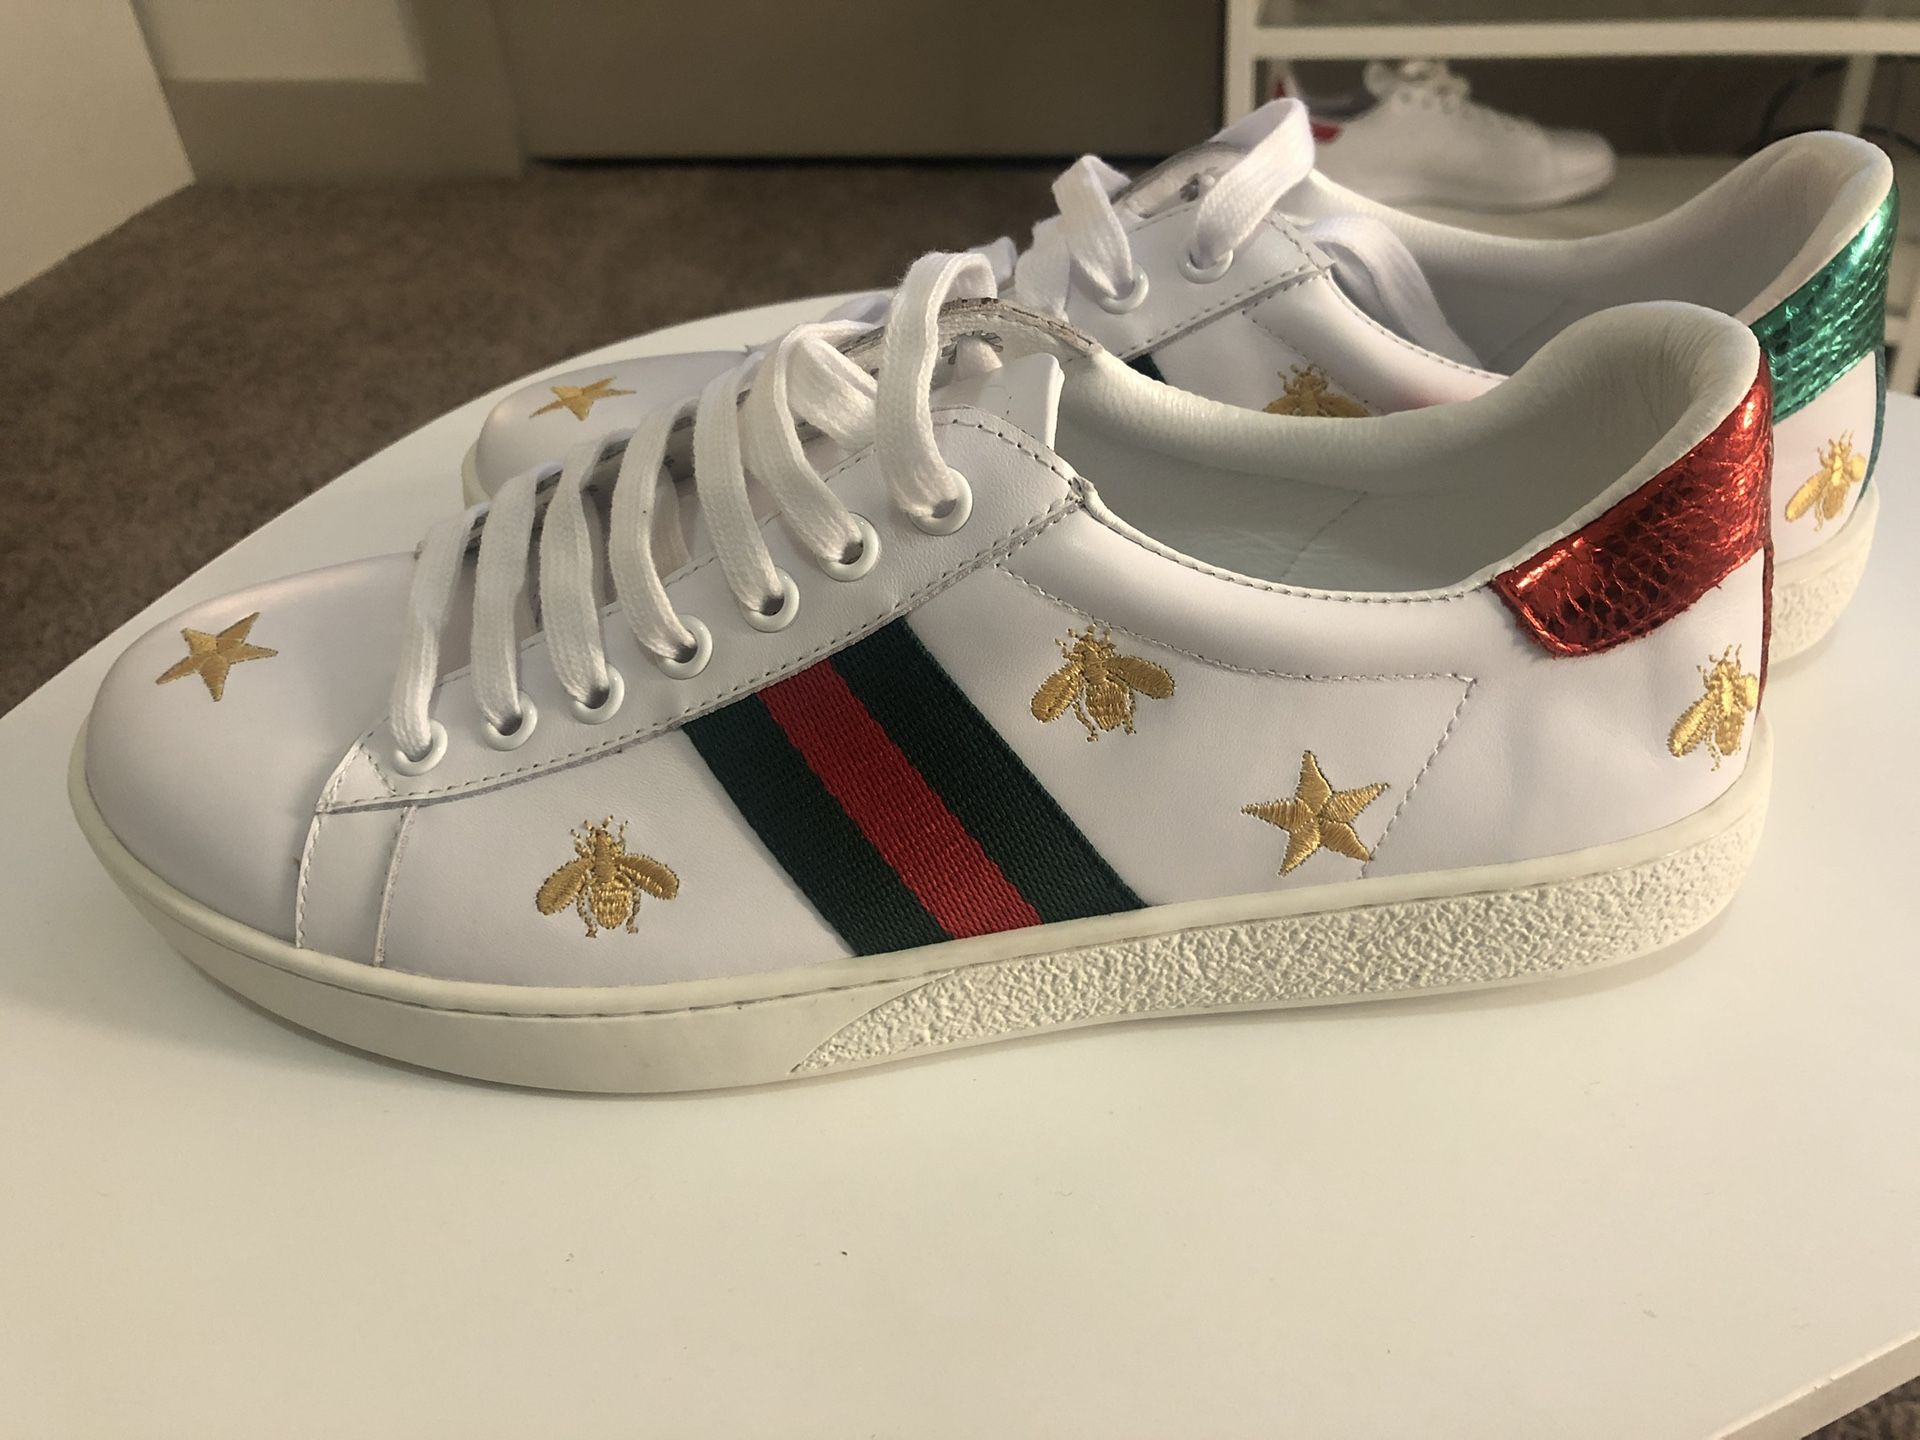 Gucci Men’s Ace Embroidered sneaker size 10.5